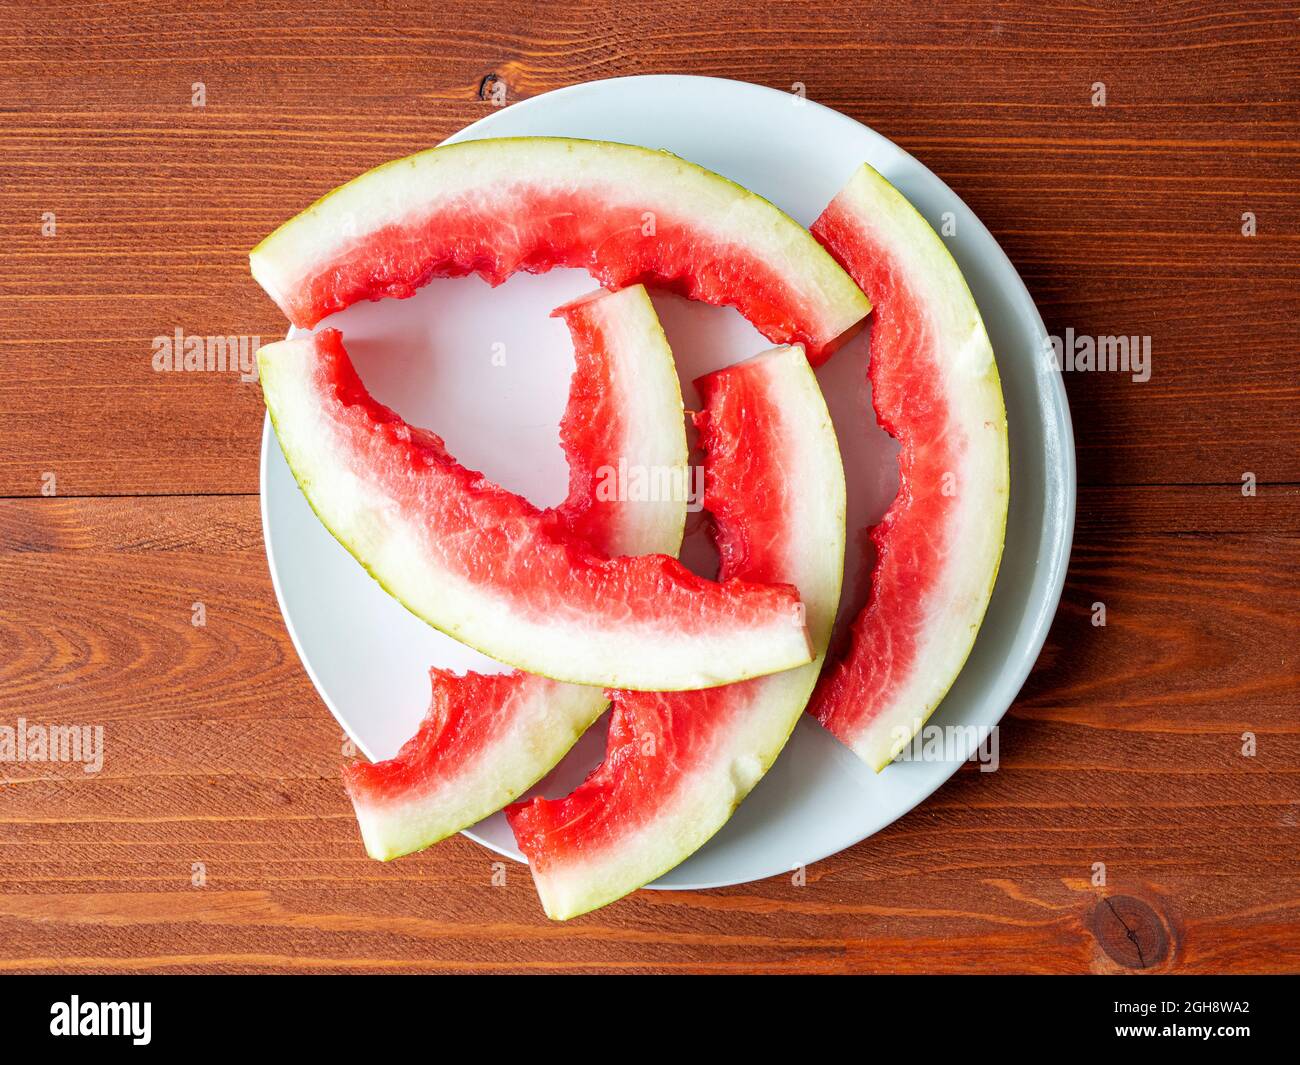 Watermelon peels on white ceramic plate. Watermelon slices, rind on the plate on wooden table, top view Stock Photo